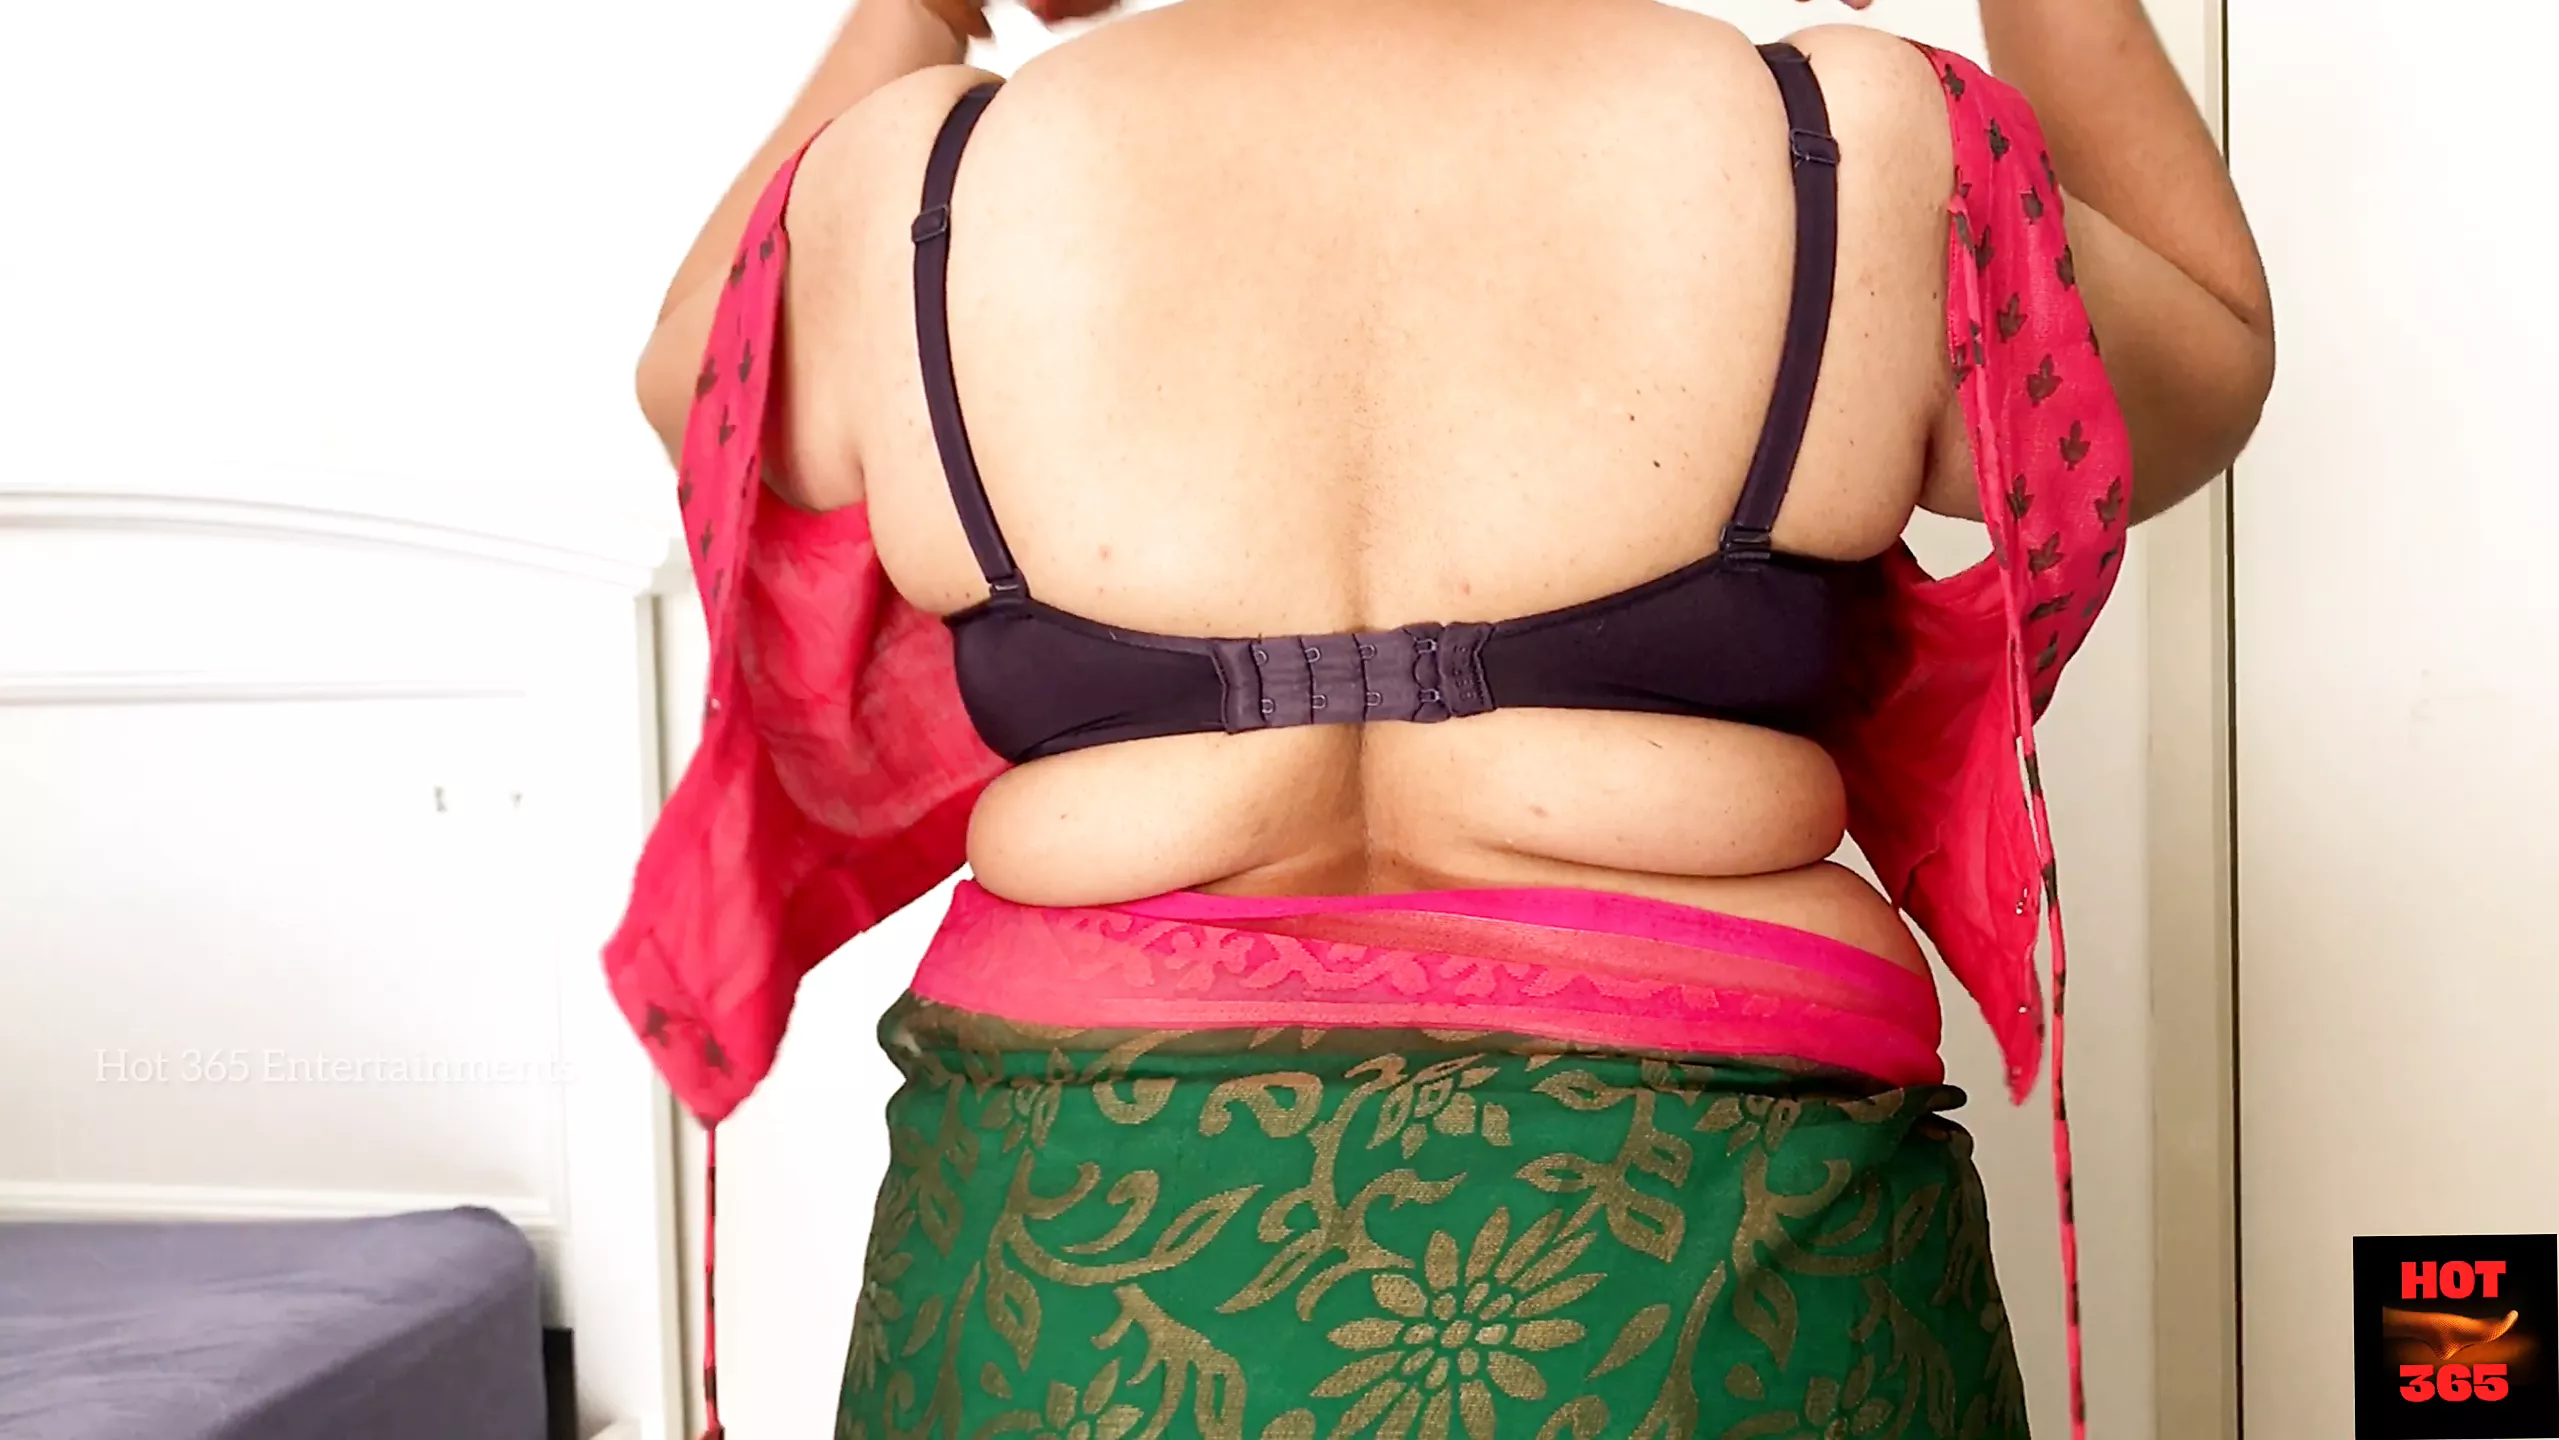 Sexiest Saree Draping in an Erotic Pose - No picture